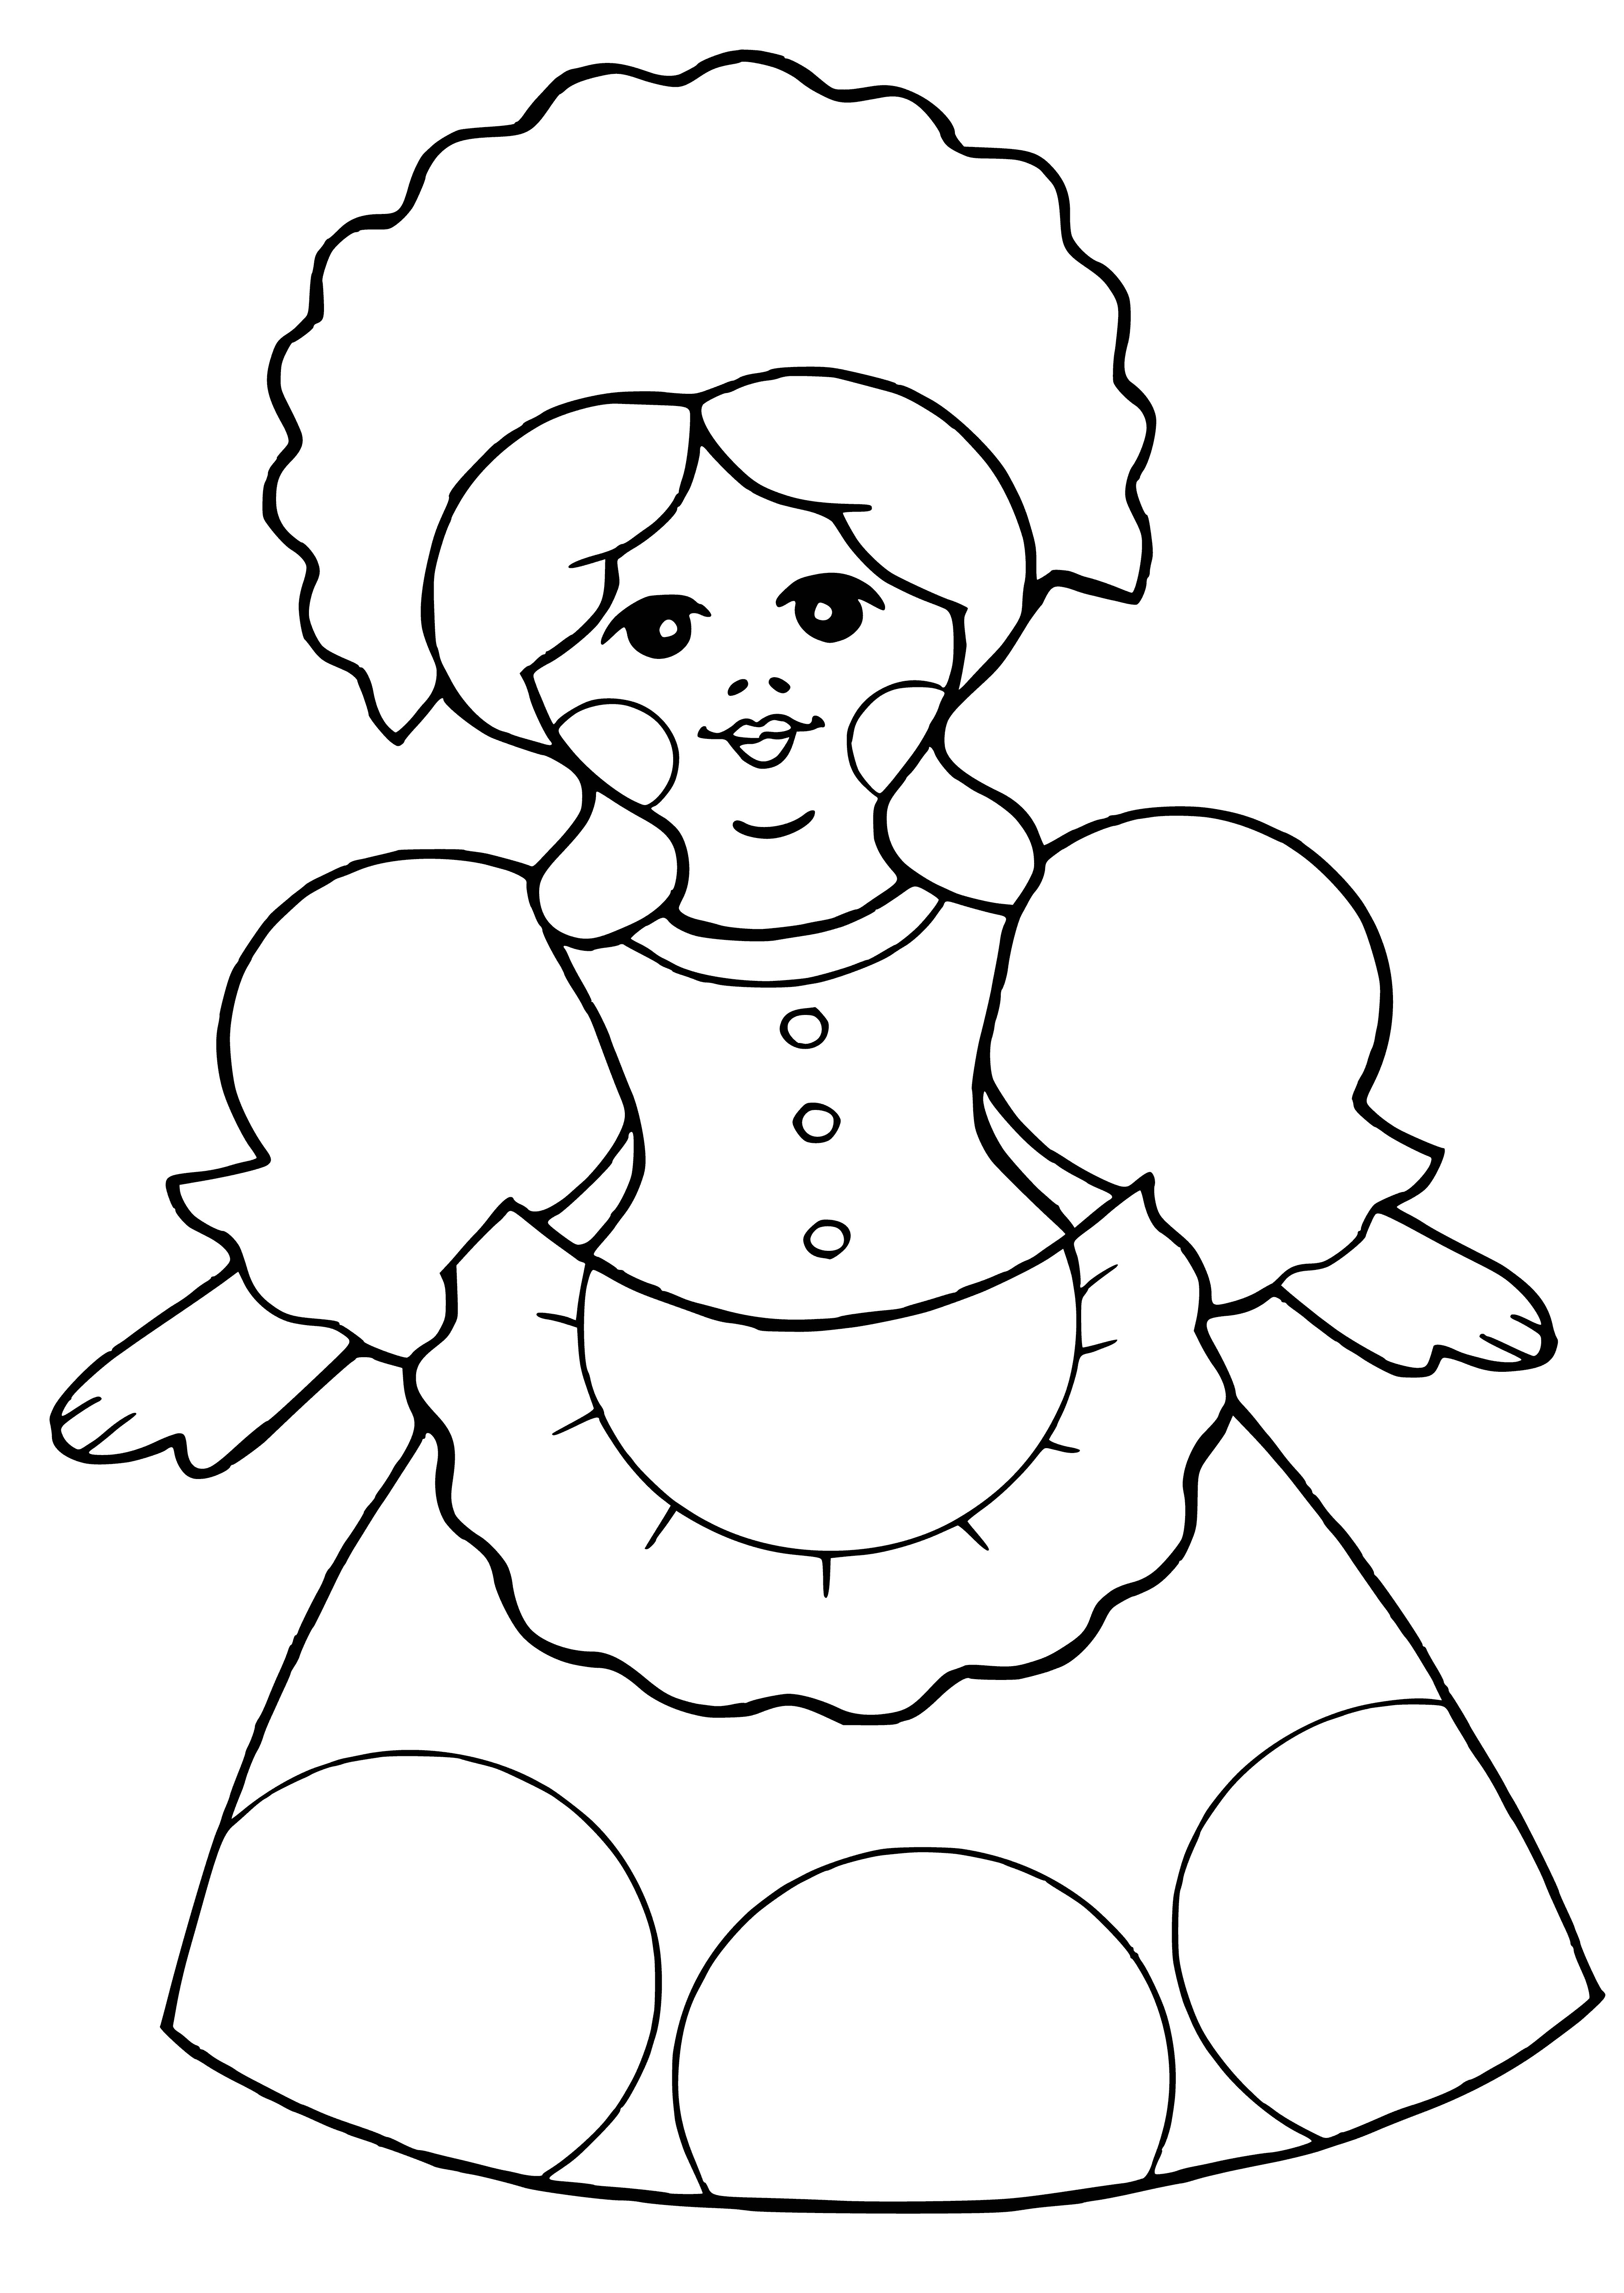 Dymkovo toy coloring page